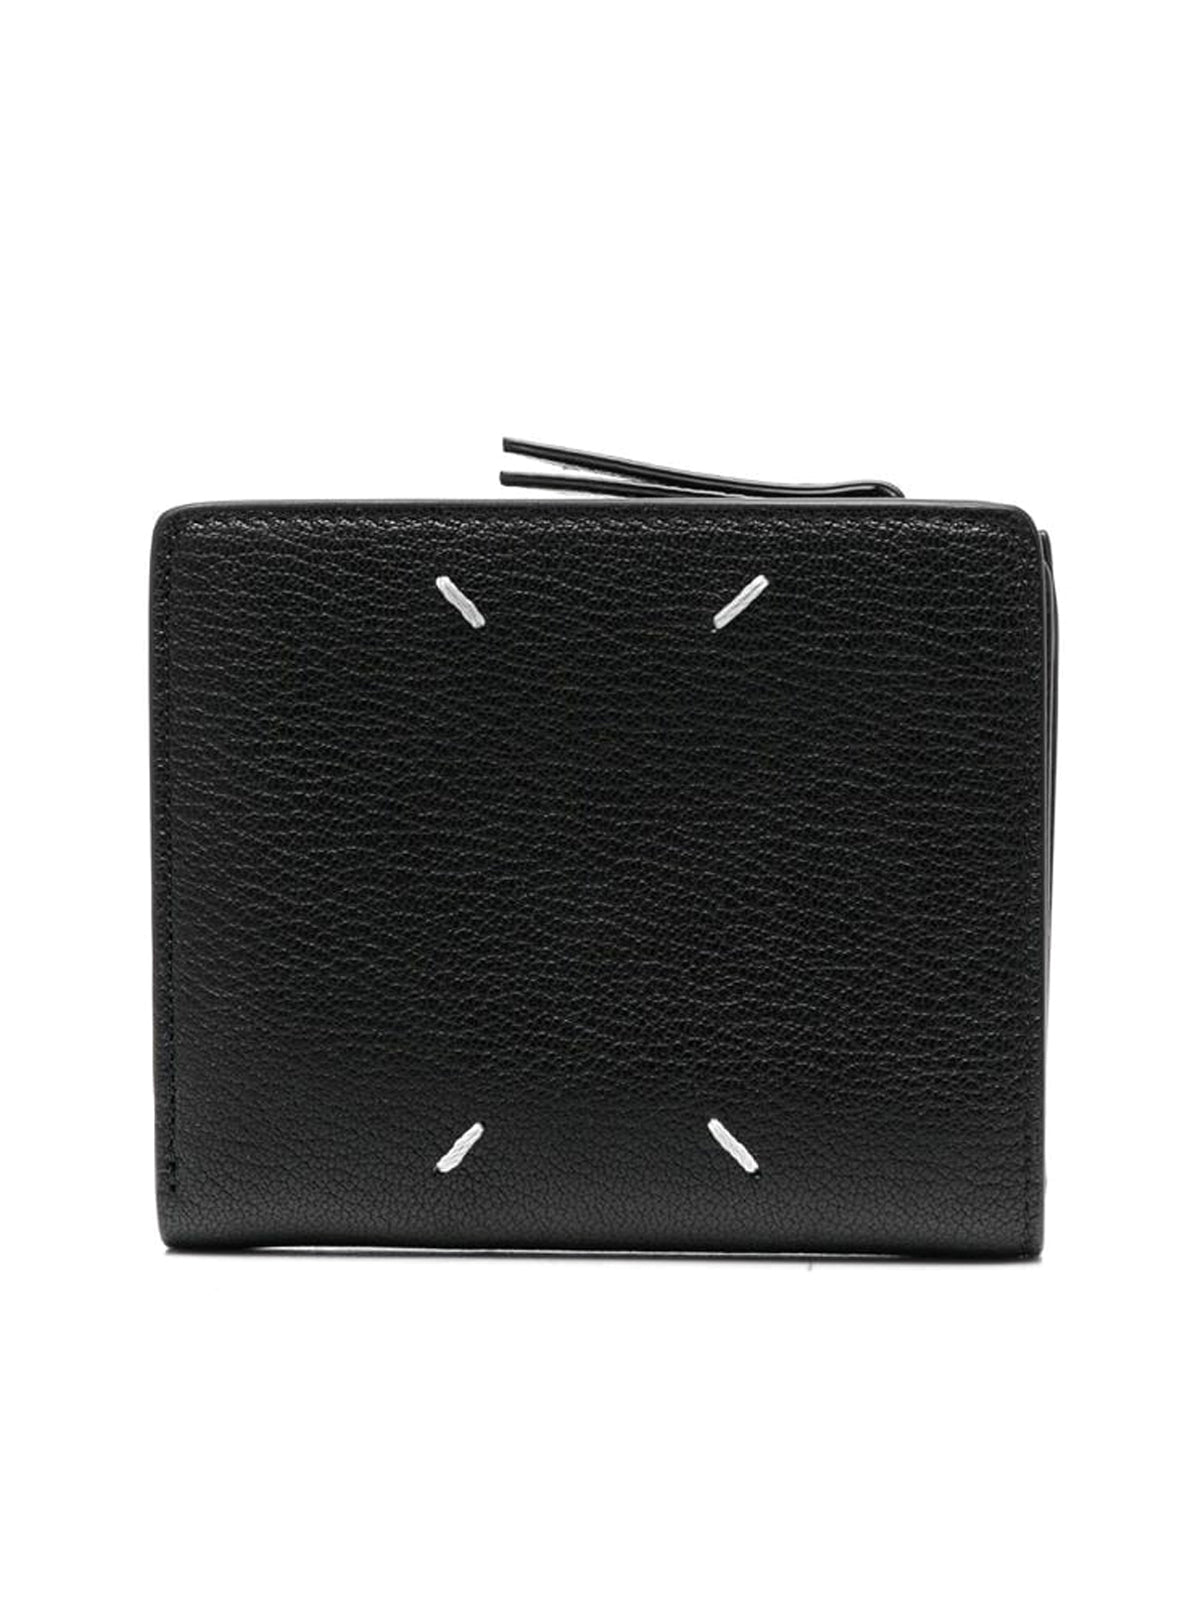 Bi-fold wallet with contrast stitching